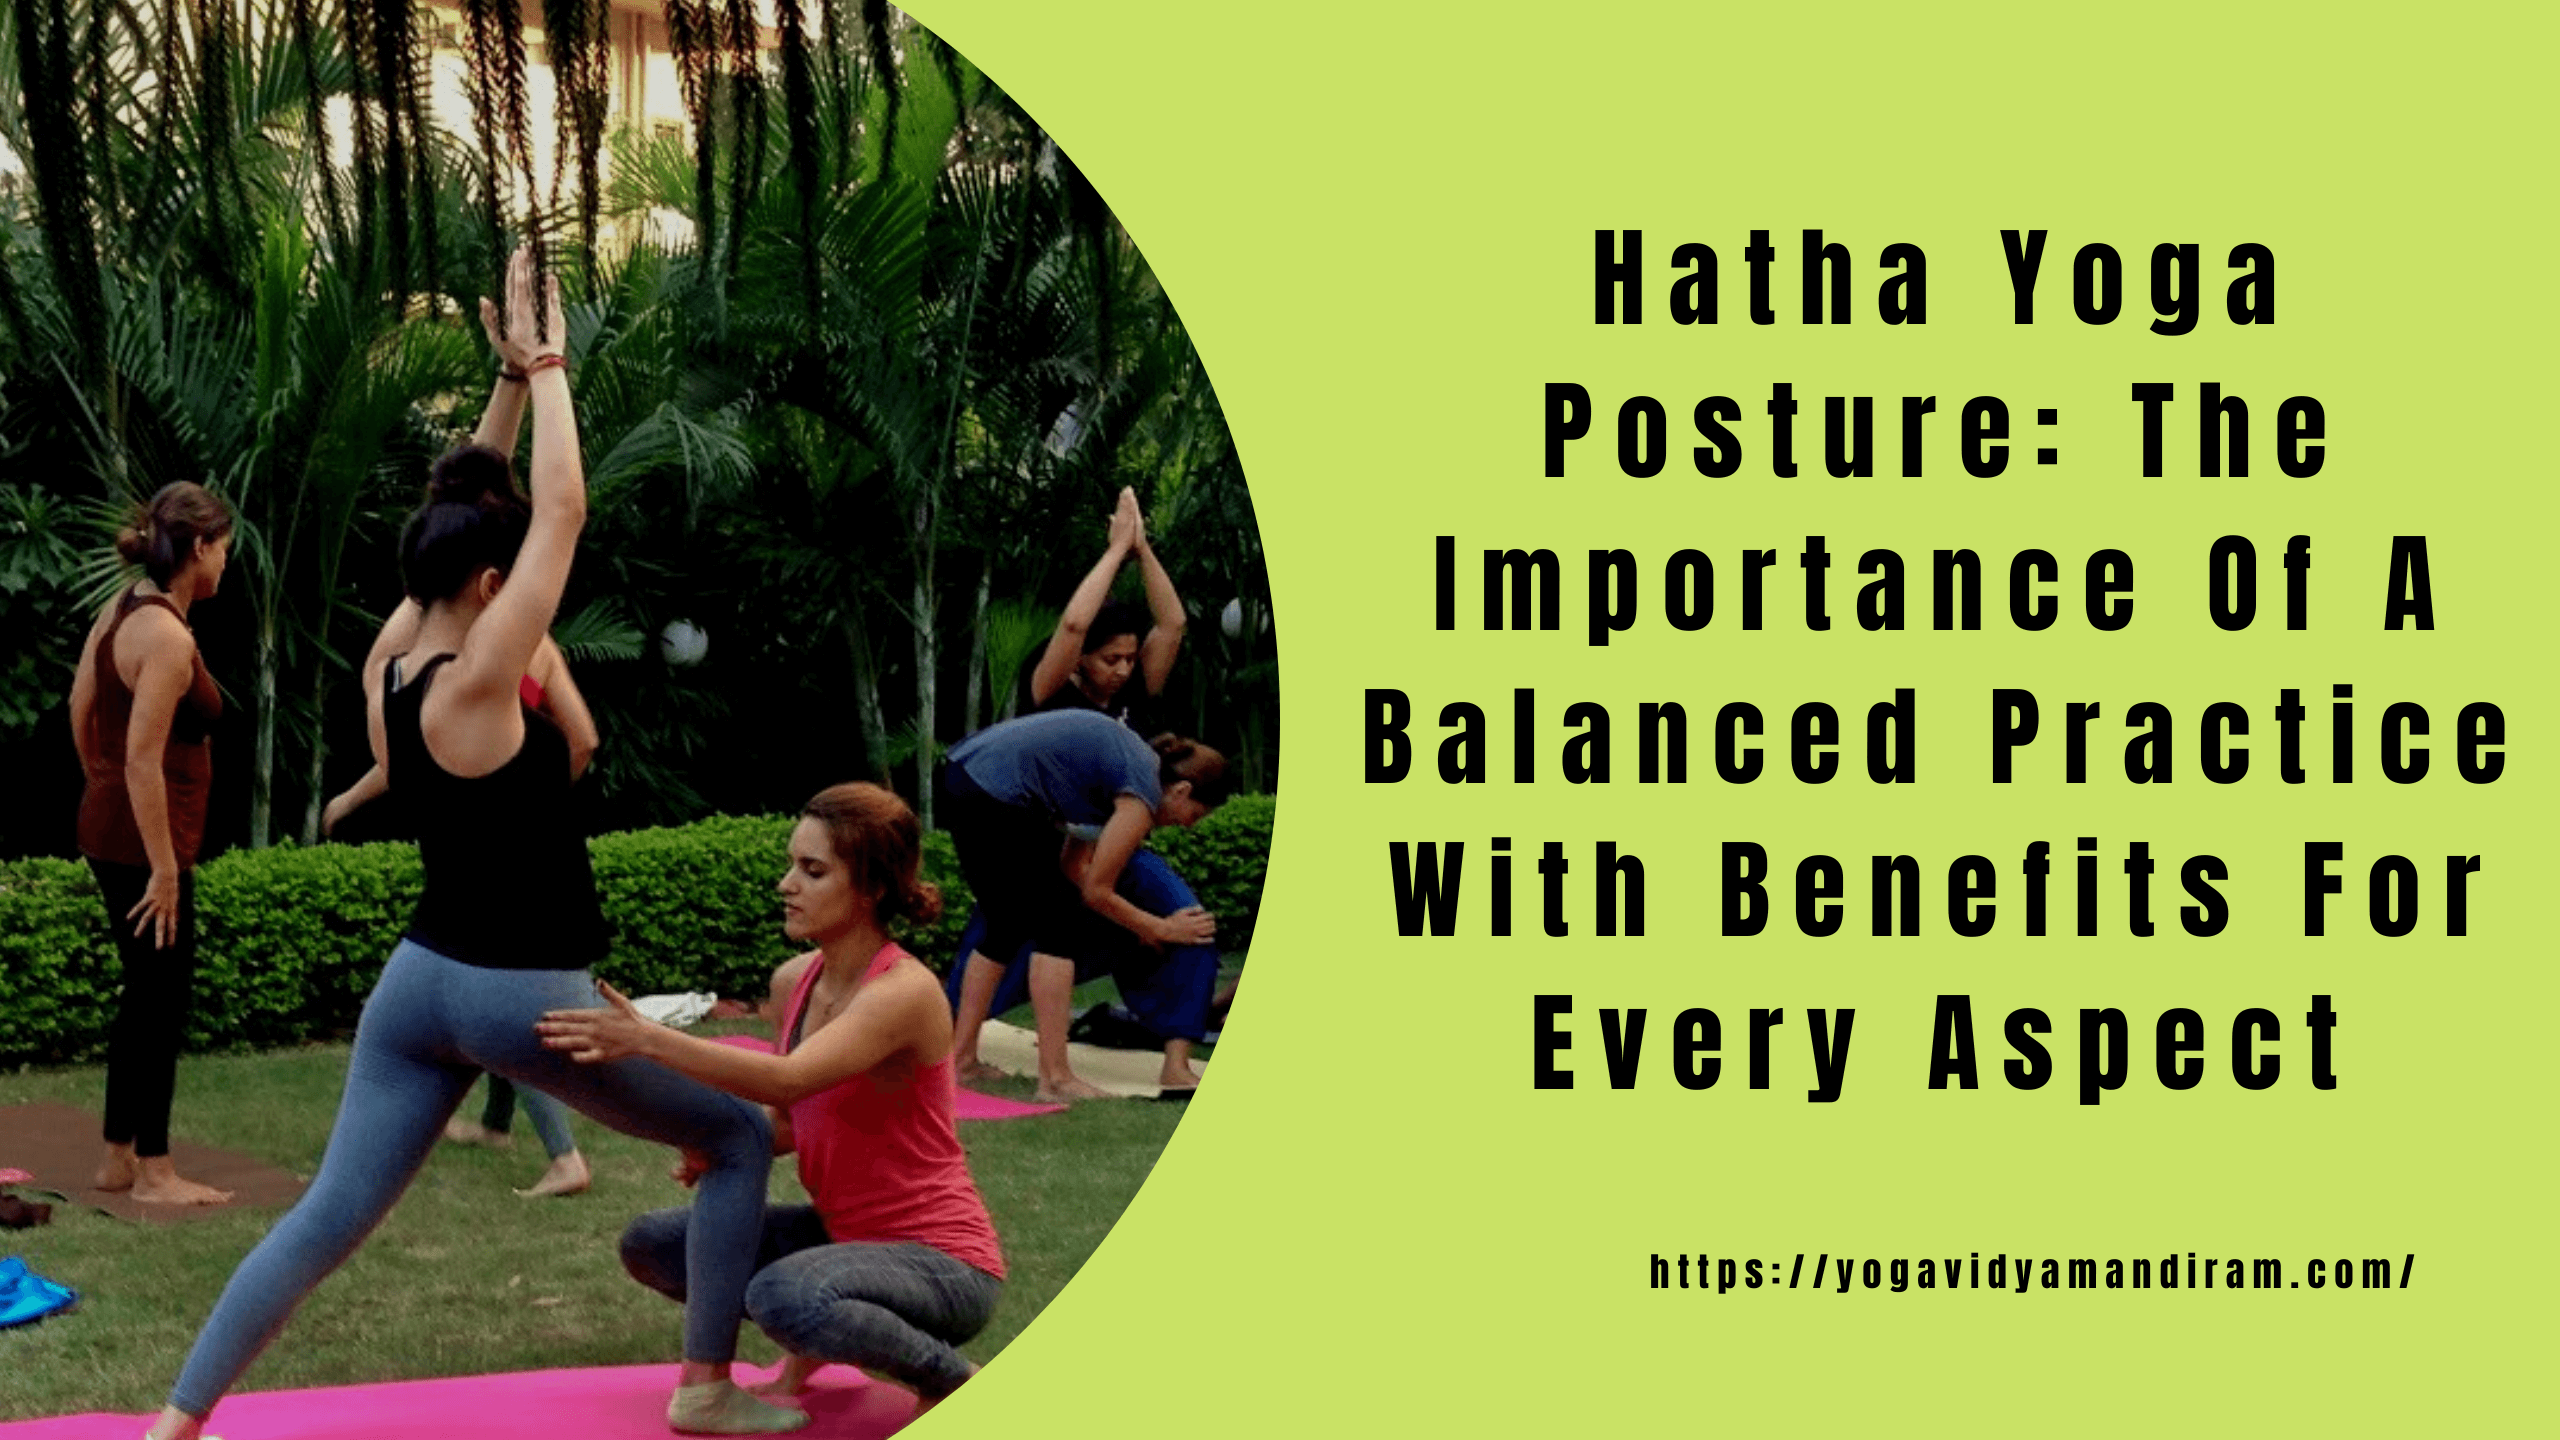 About — The Hatha Yoga Effect